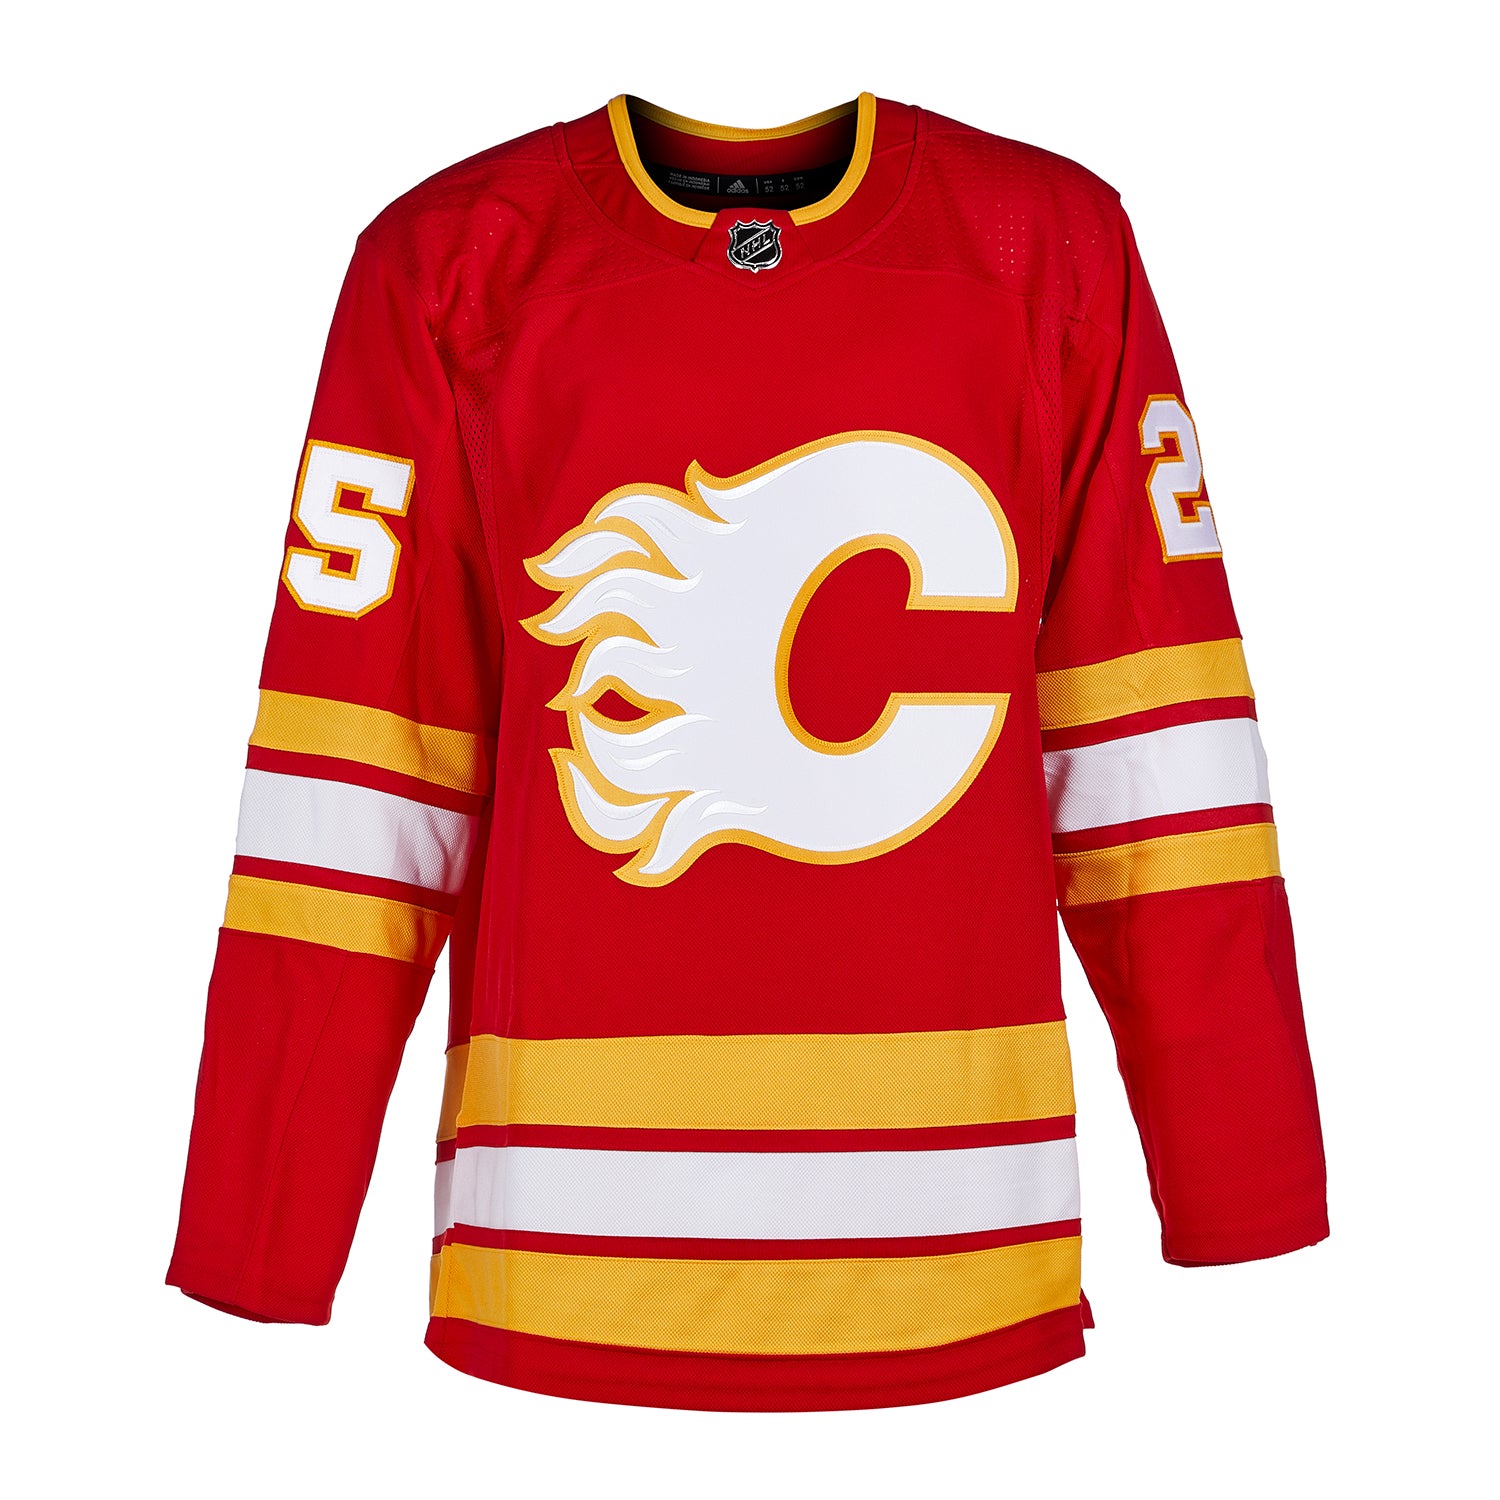 JAROME IGINLA Signed Calgary Flames Red Reebok Jersey - NHL Auctions